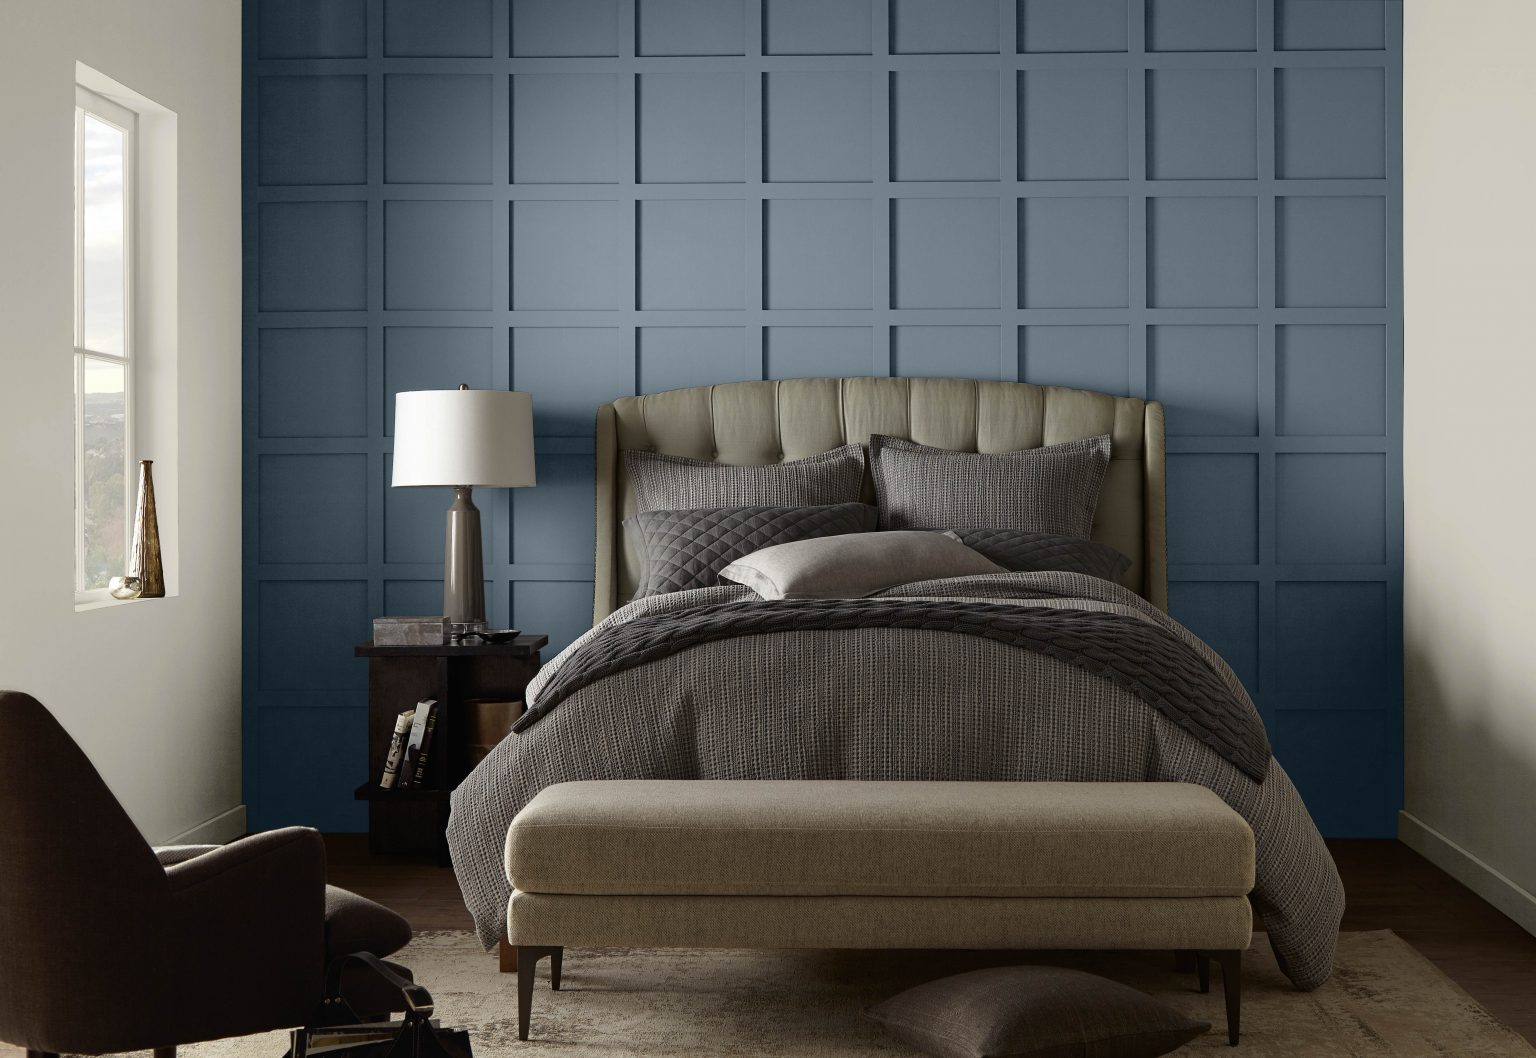 A sophisticatd bedroom with an accent wall painted in Adirondack Blue